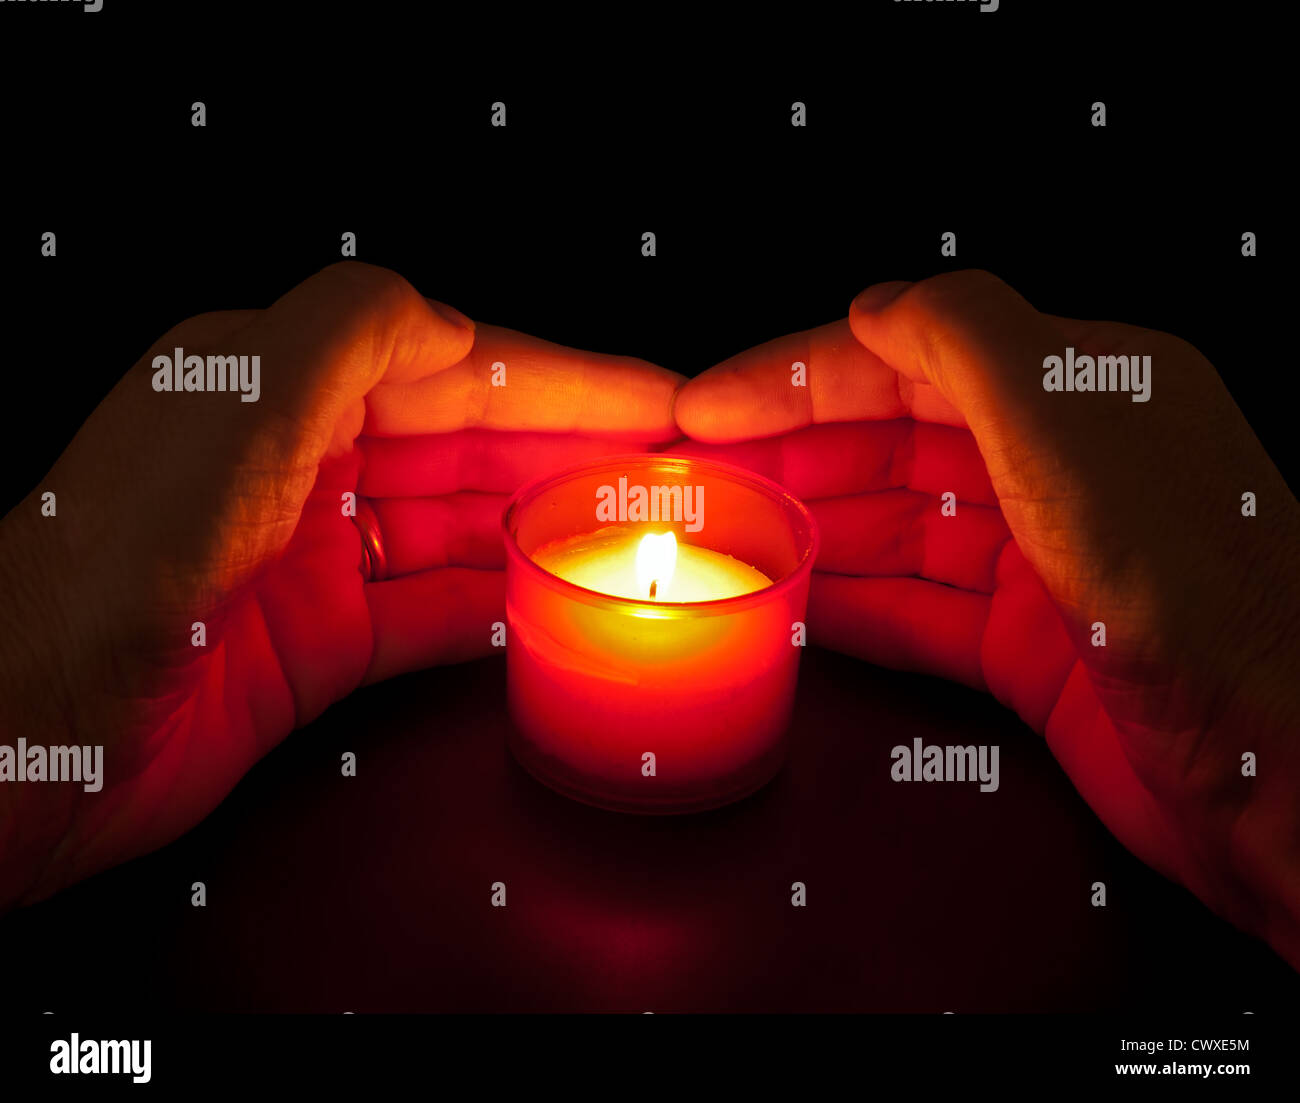 In memoriam - hands with votive candle in red holder Stock Photo